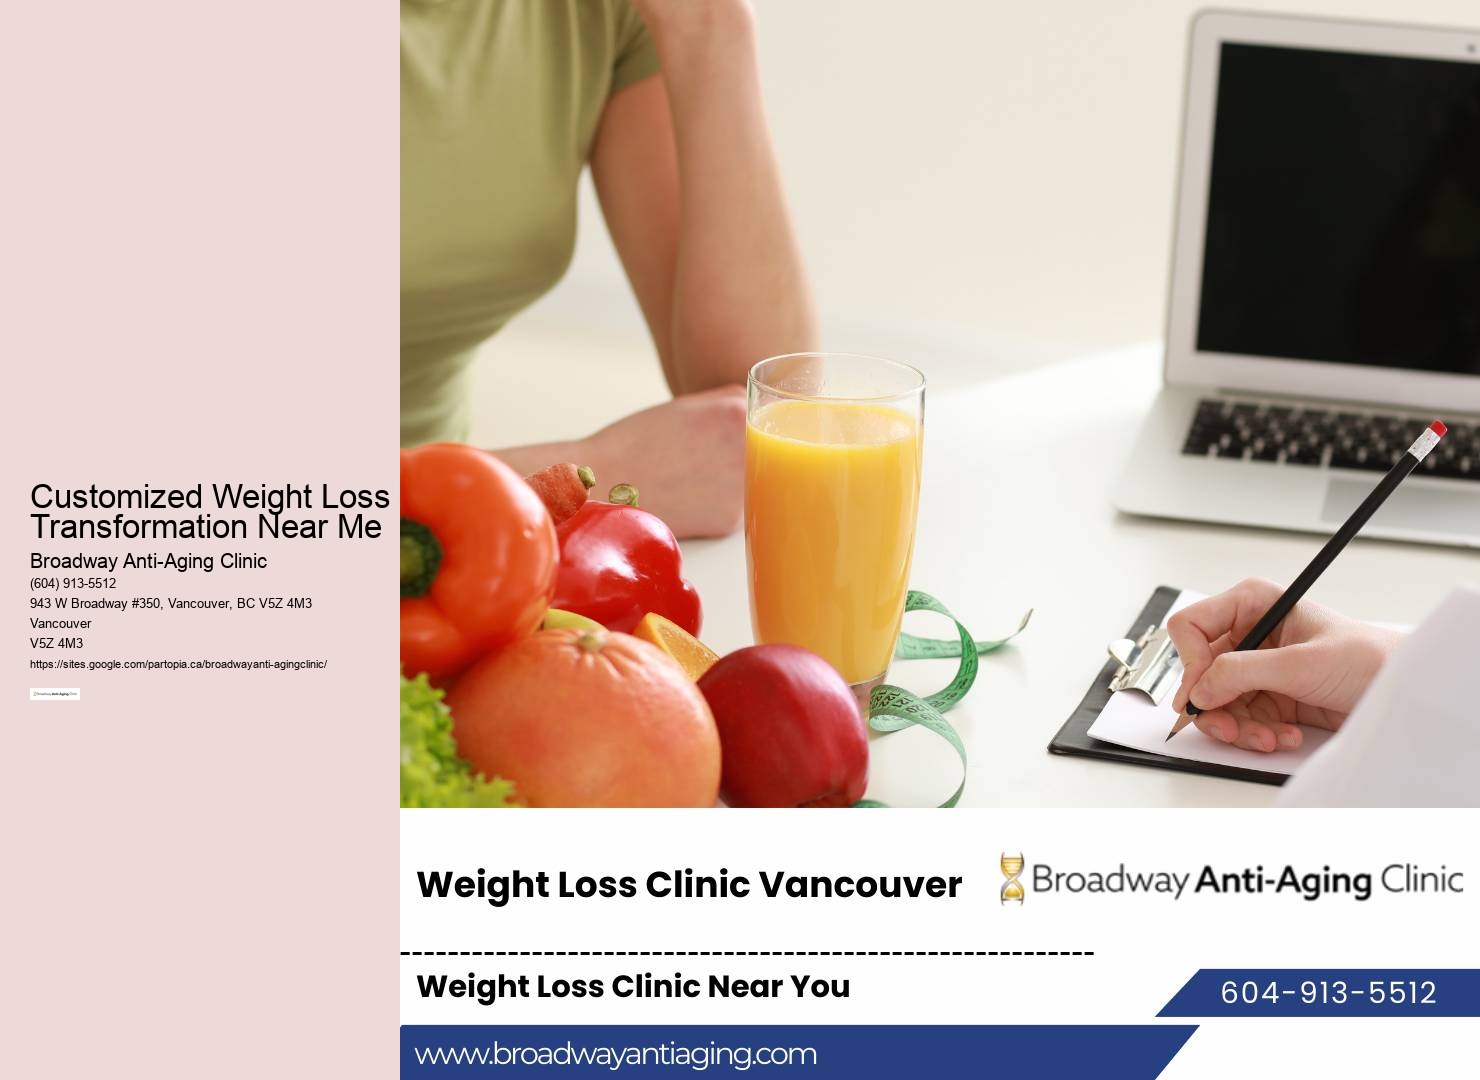 Weight loss clinic Vancouver walk-in